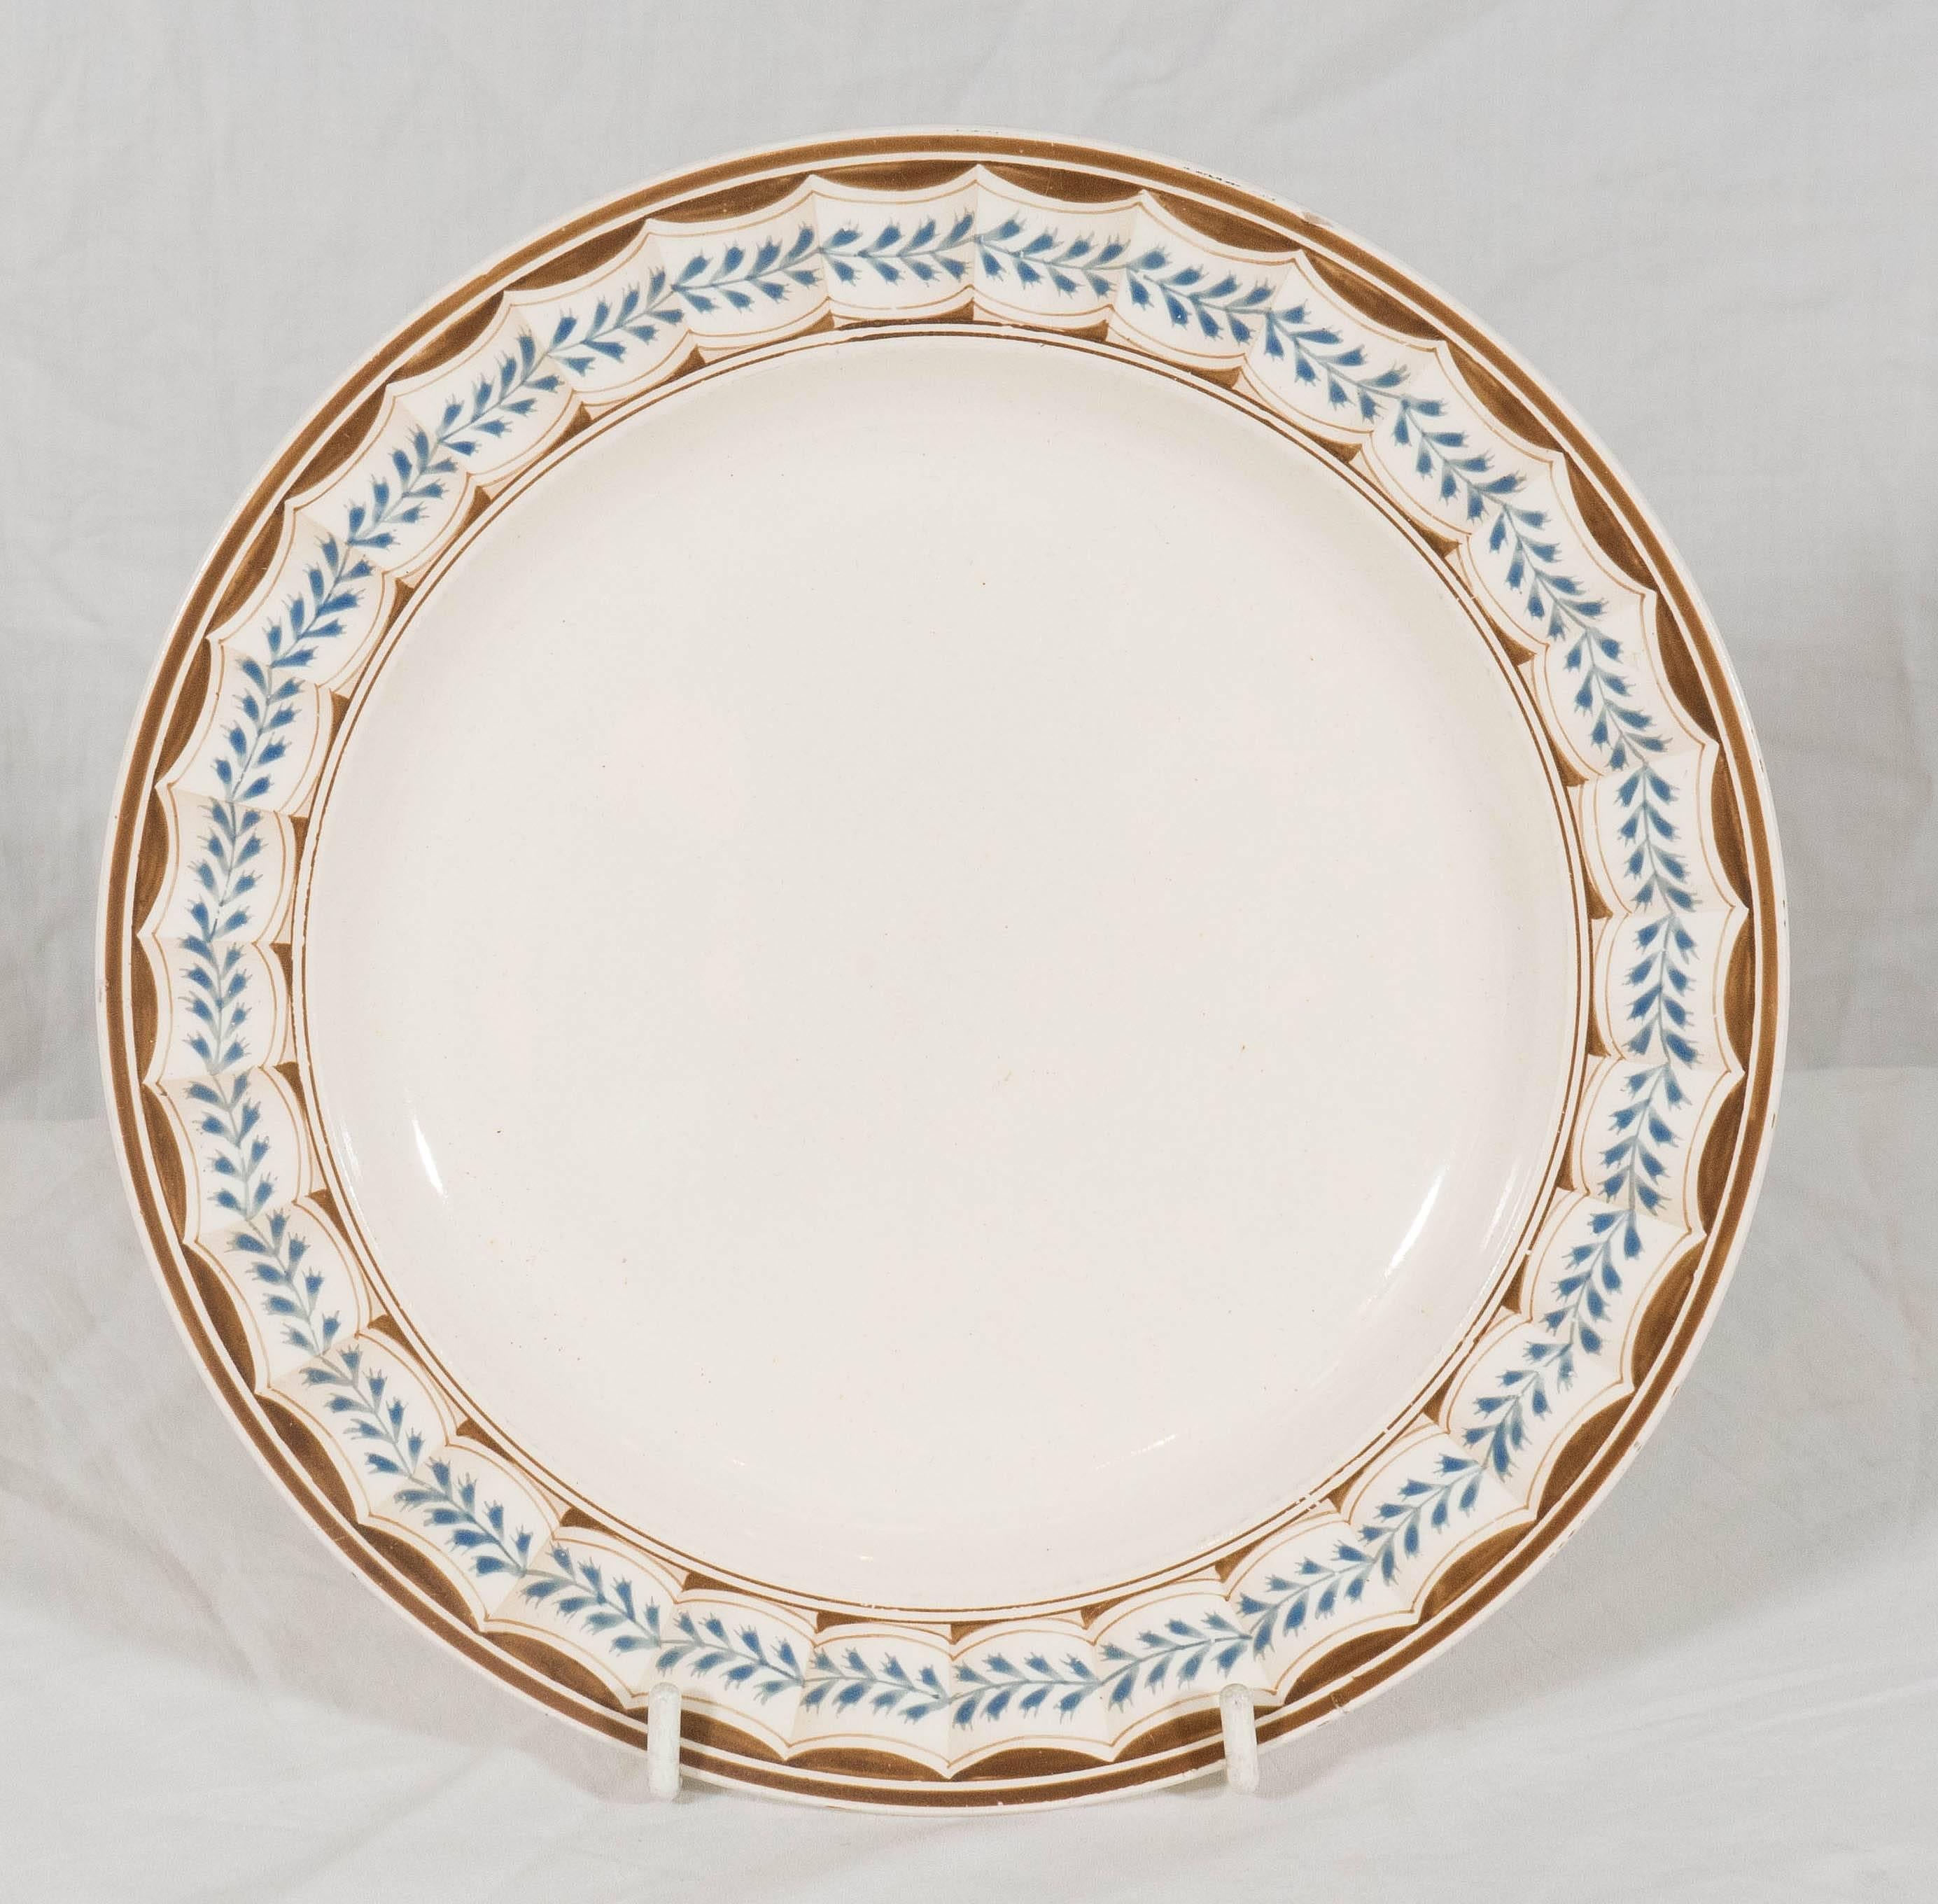 Neoclassical Four Wedgwood Creamware Dishes in the Lag and Feather Pattern